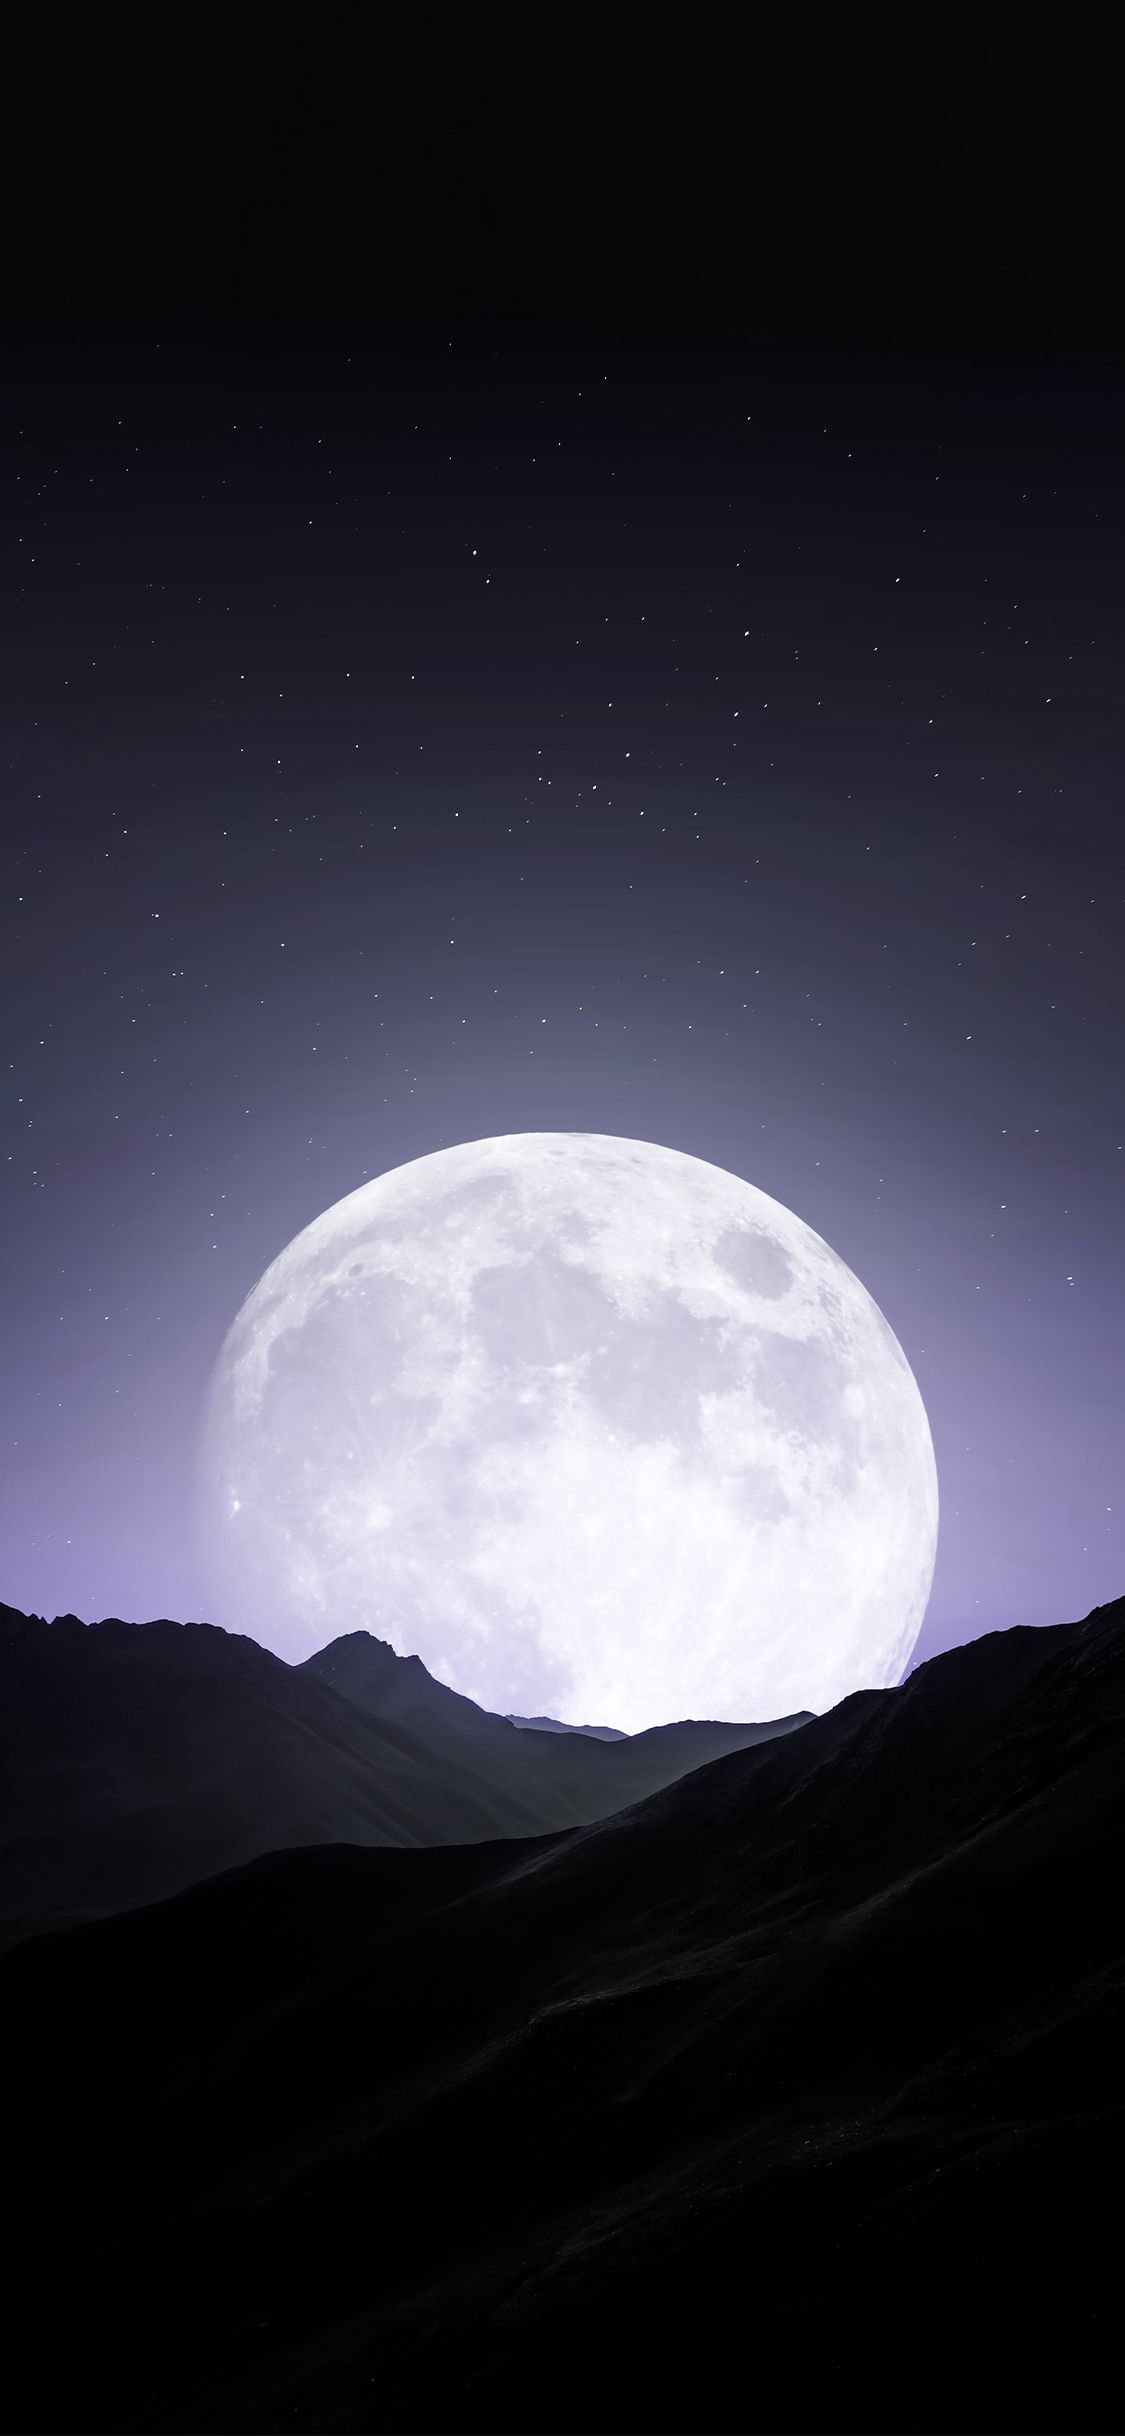 The moon rising over the mountains wallpaper 750x1334 - Moon